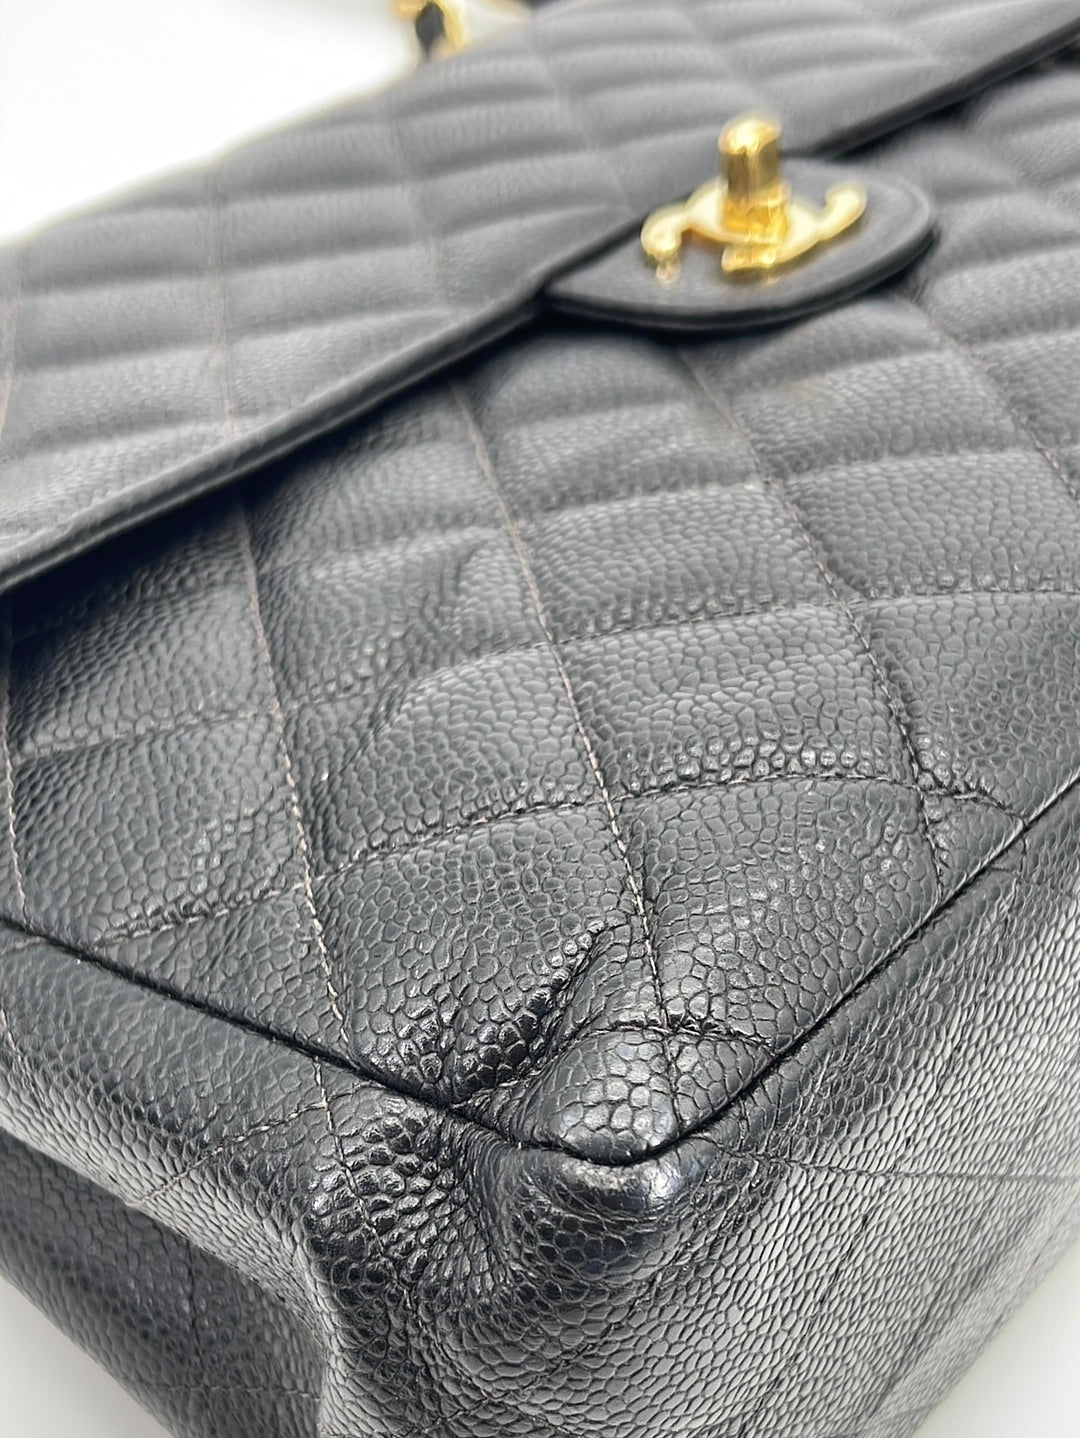 Vintage CHANEL Black Caviar Leather Large Single Flap Square Bag with 24k Gold Plated Hardware 7665216 051723